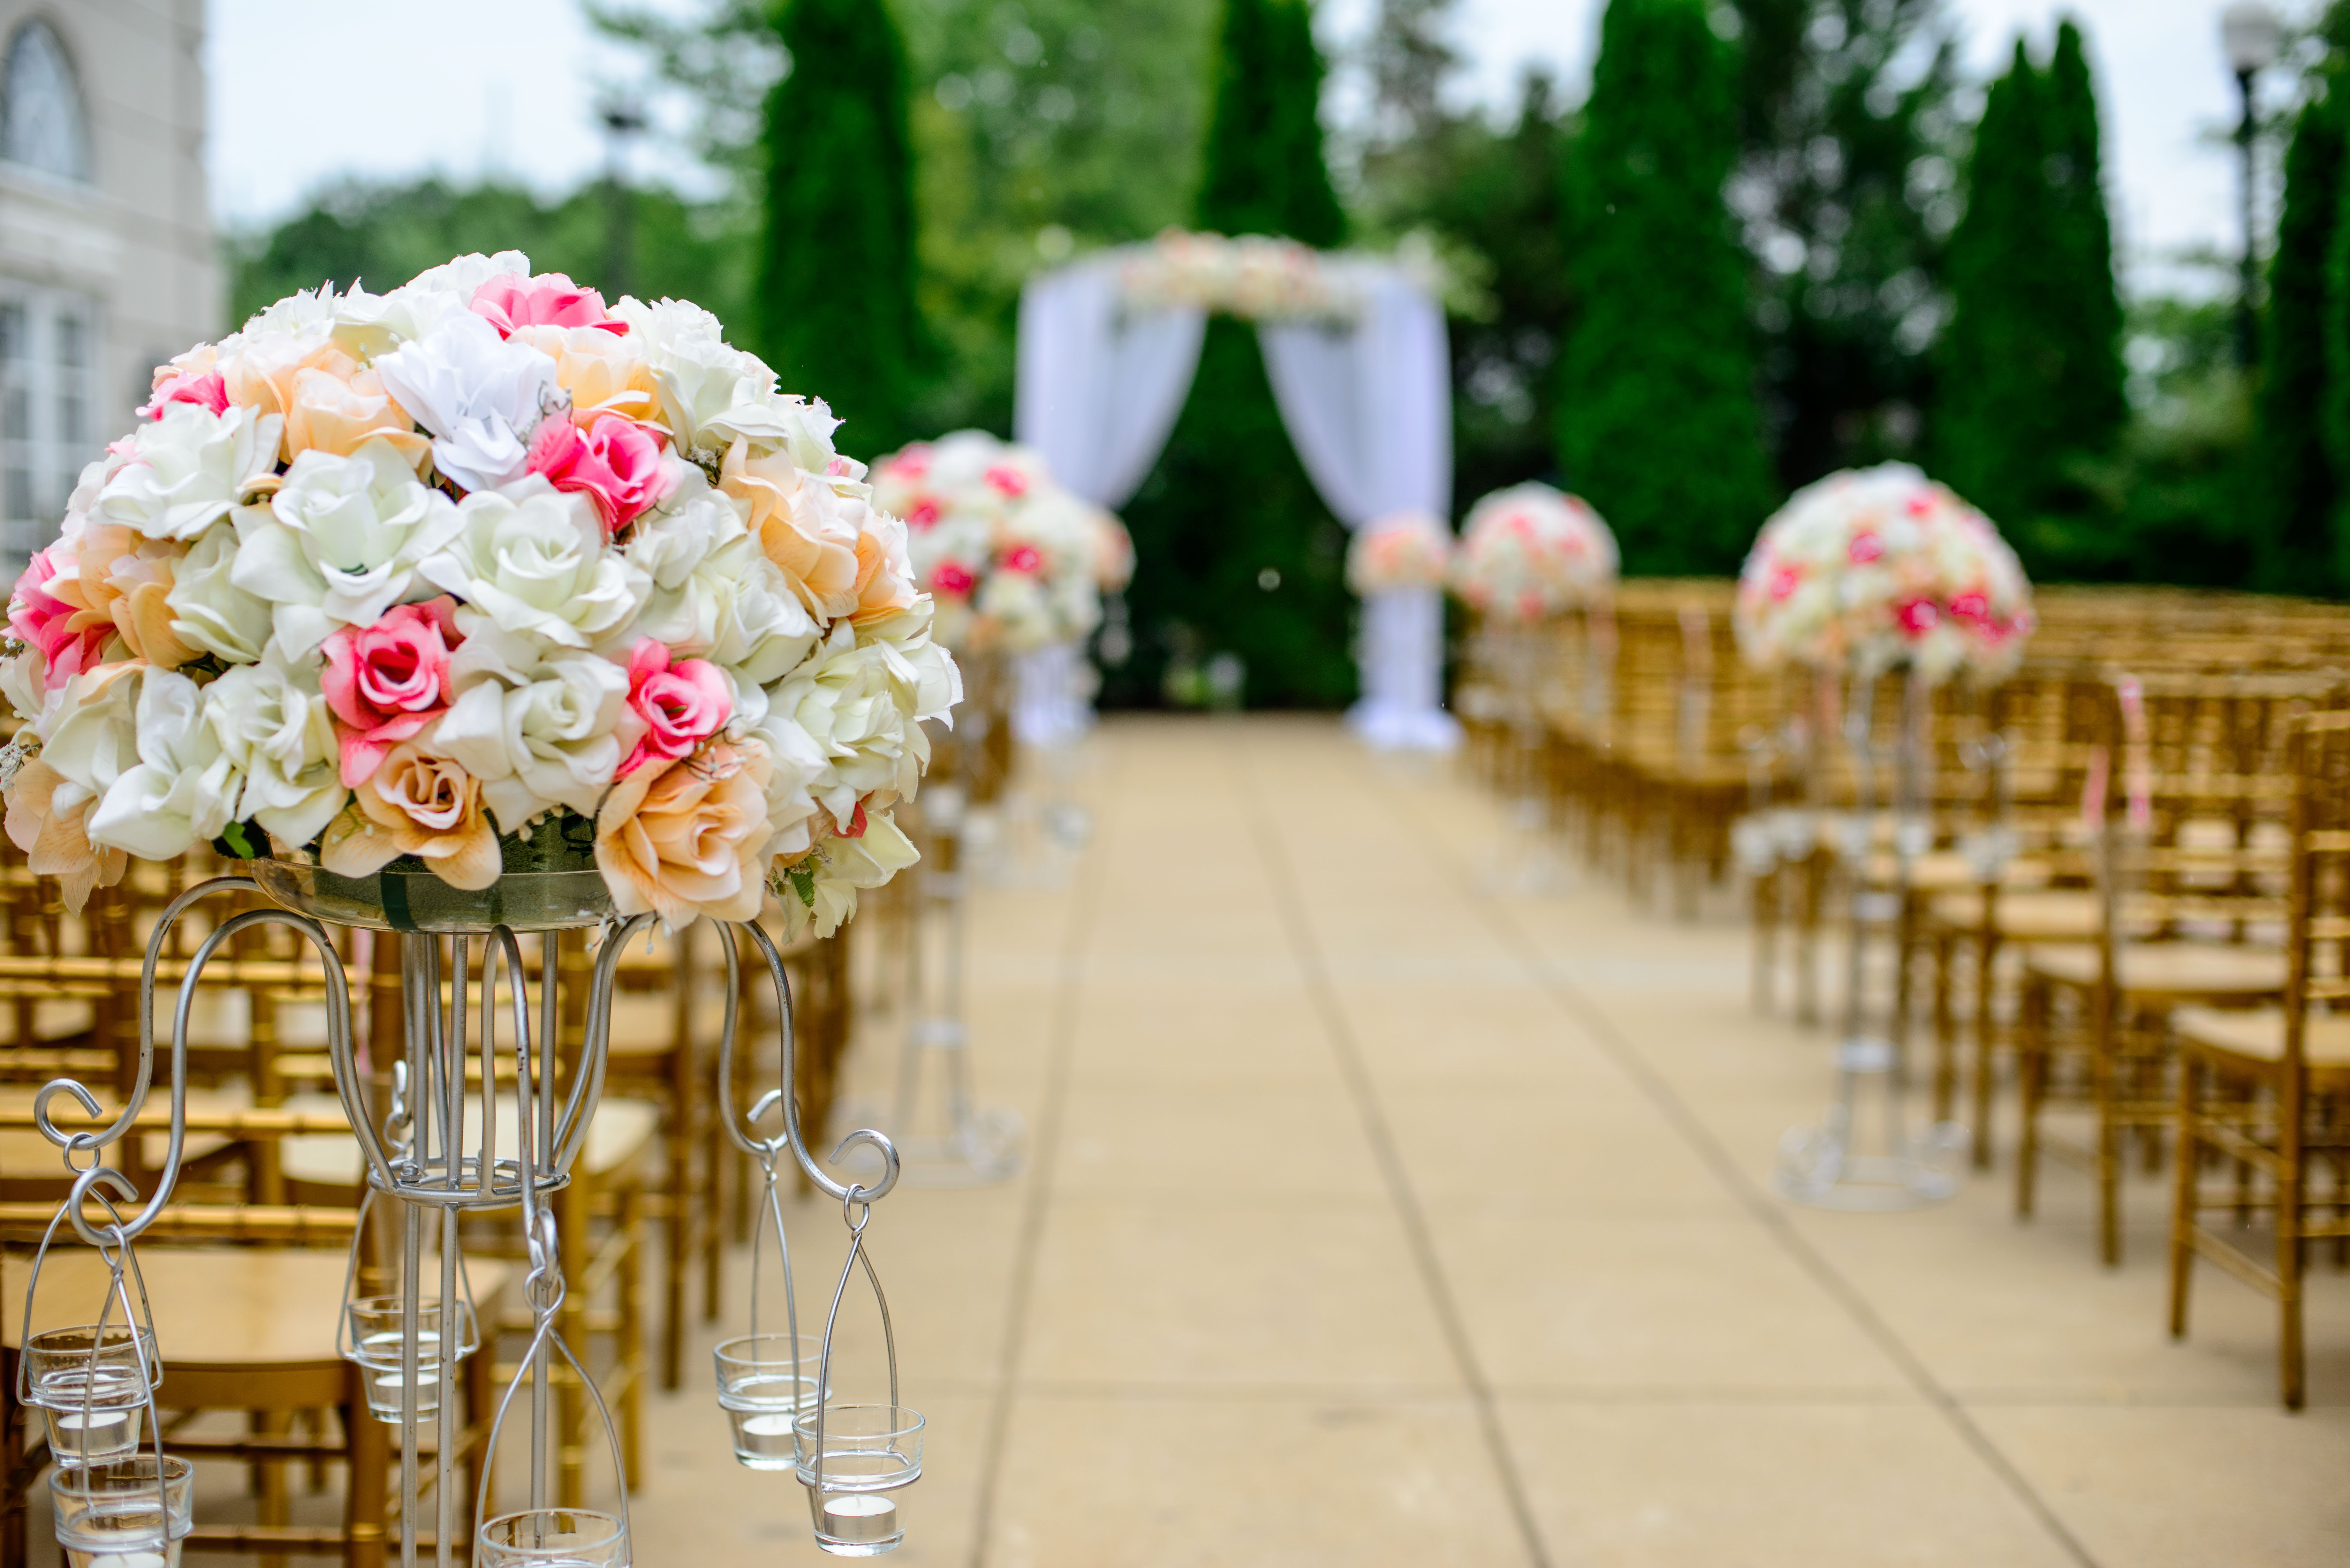 Various specific points to consider before selecting the wedding venue